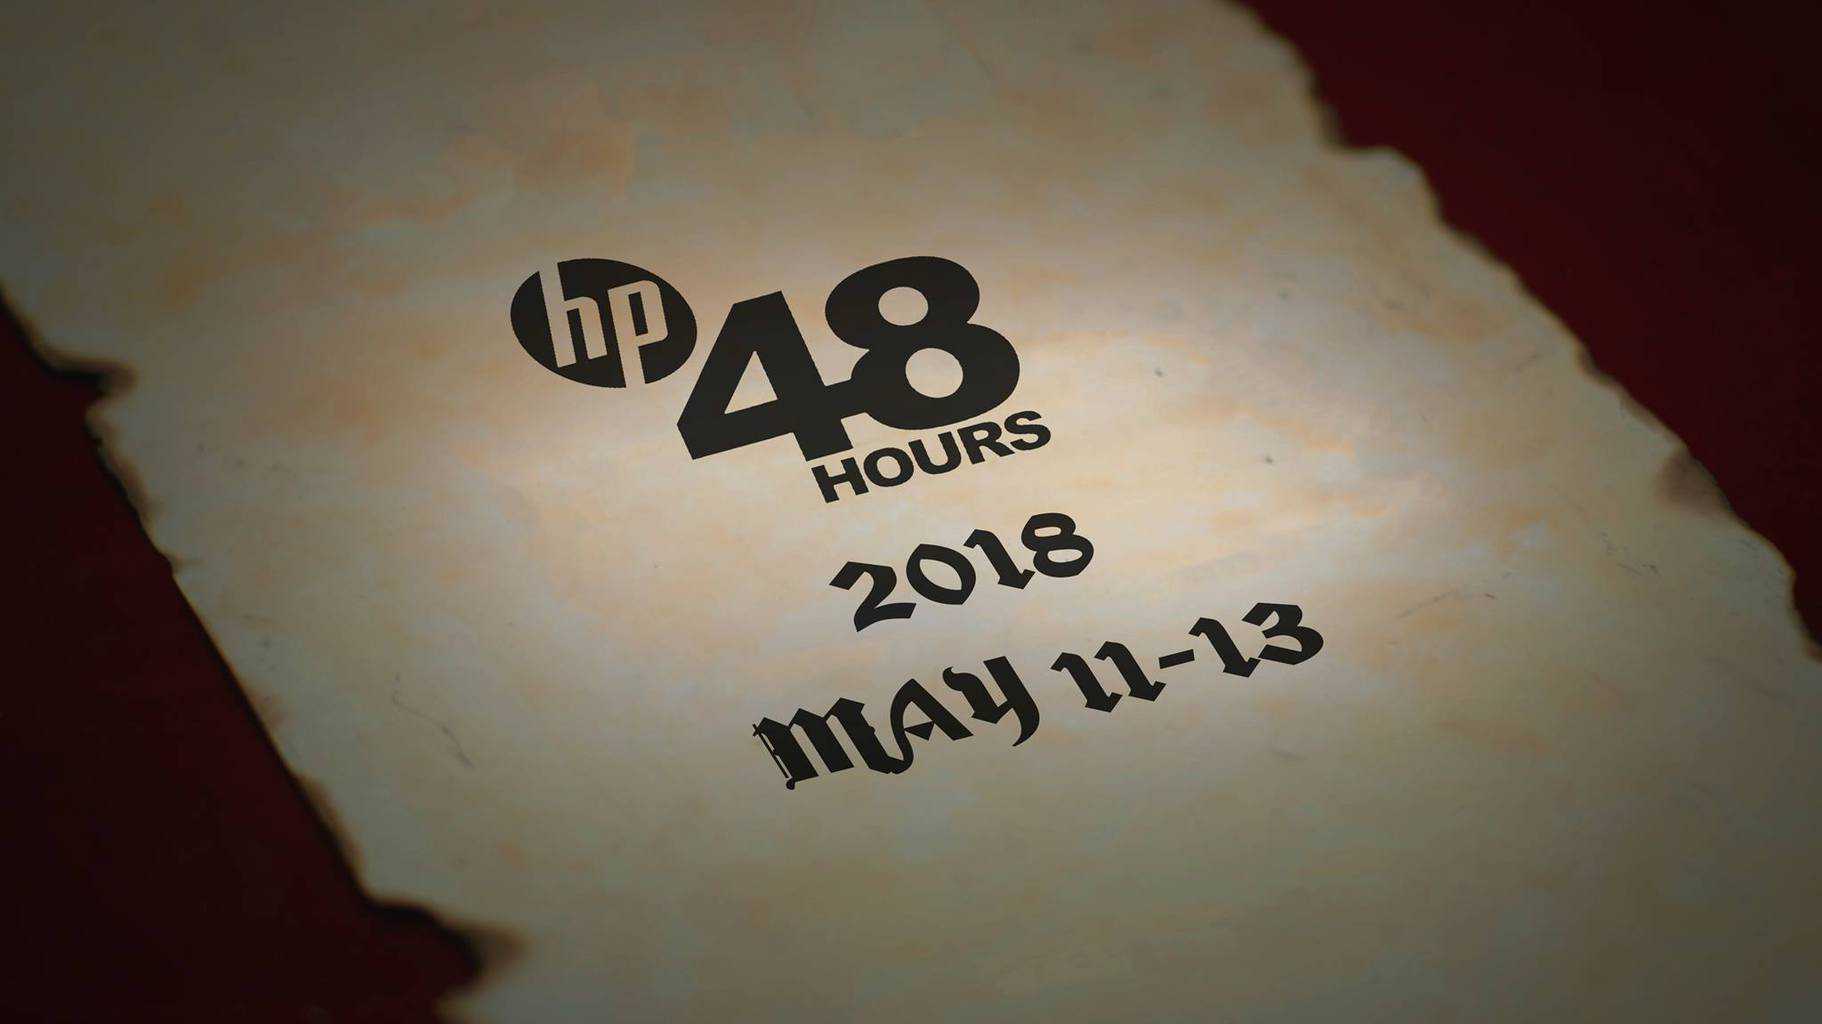 HP48HOURS Film Competition 2018